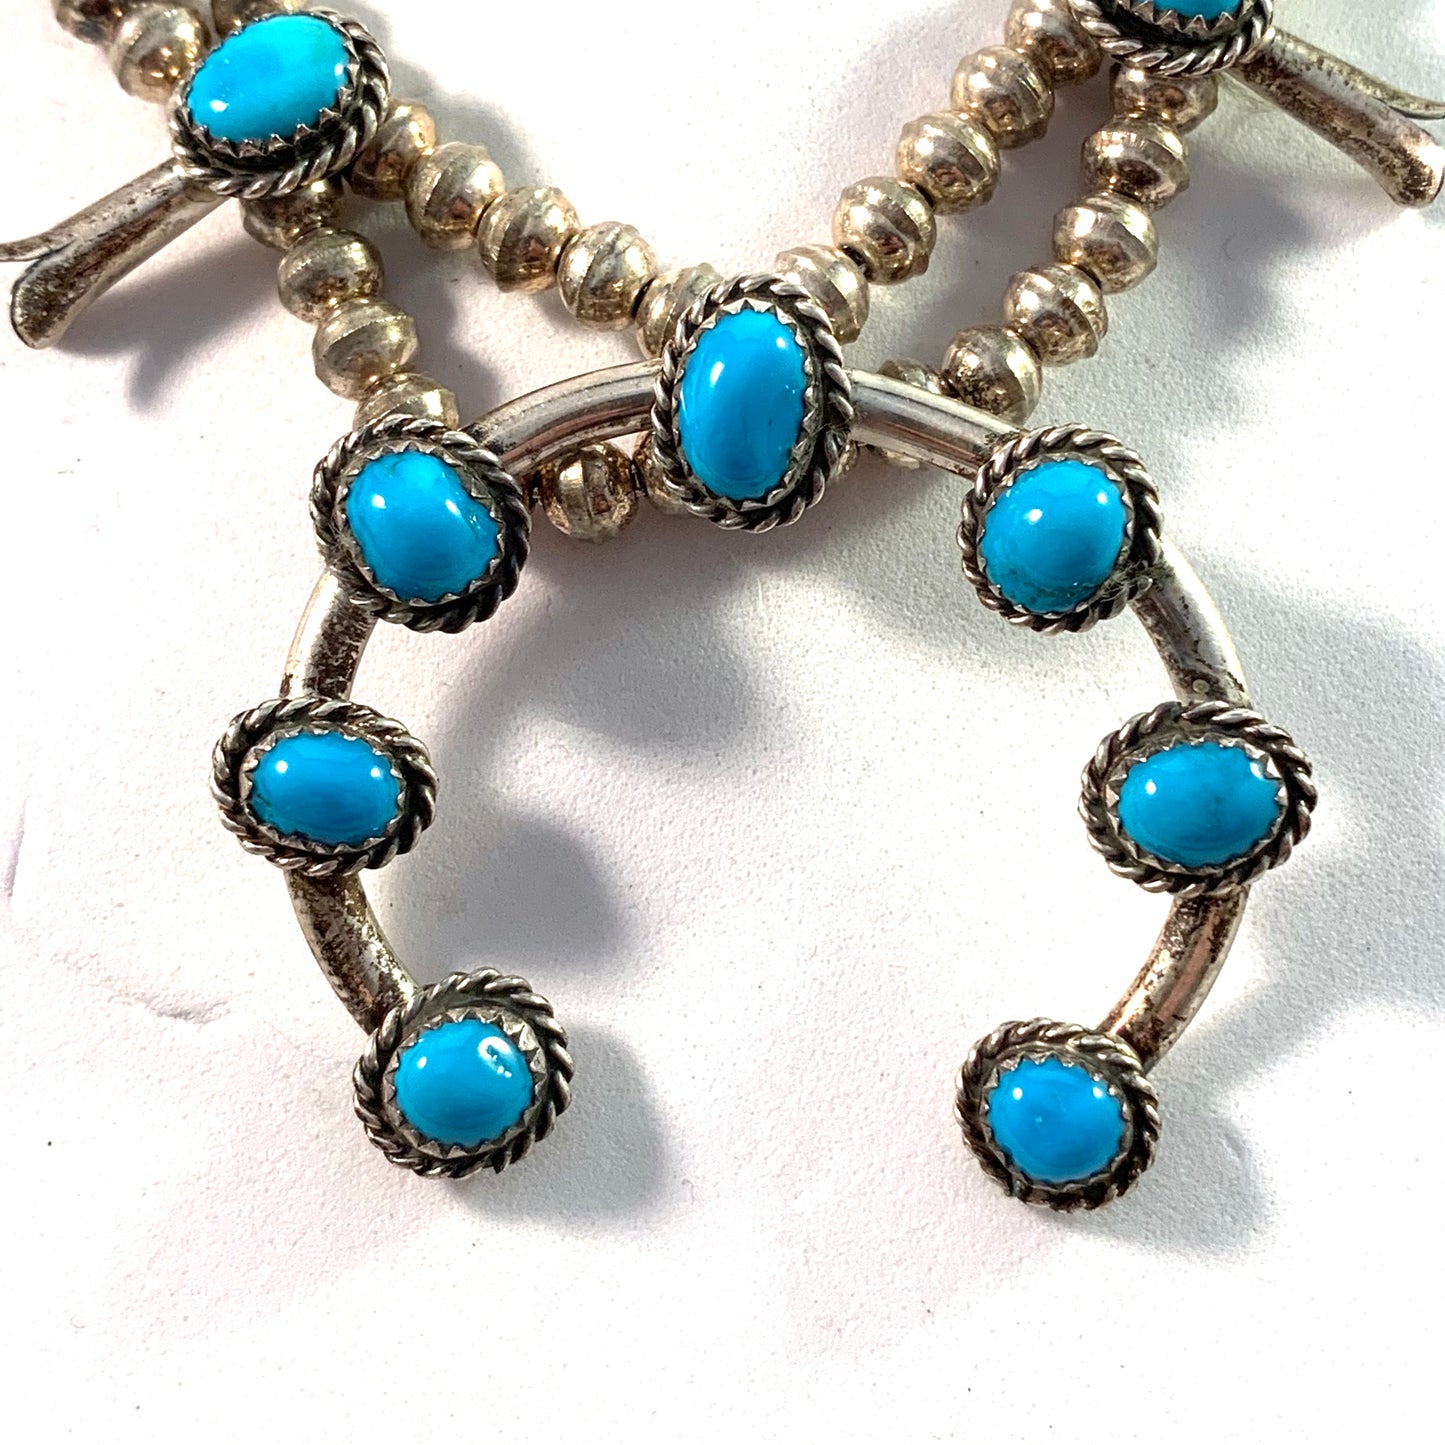 Signed Vintage Navajo Native American Sterling Silver Blue Turquoise Squash Blossom Necklace and Earrings.